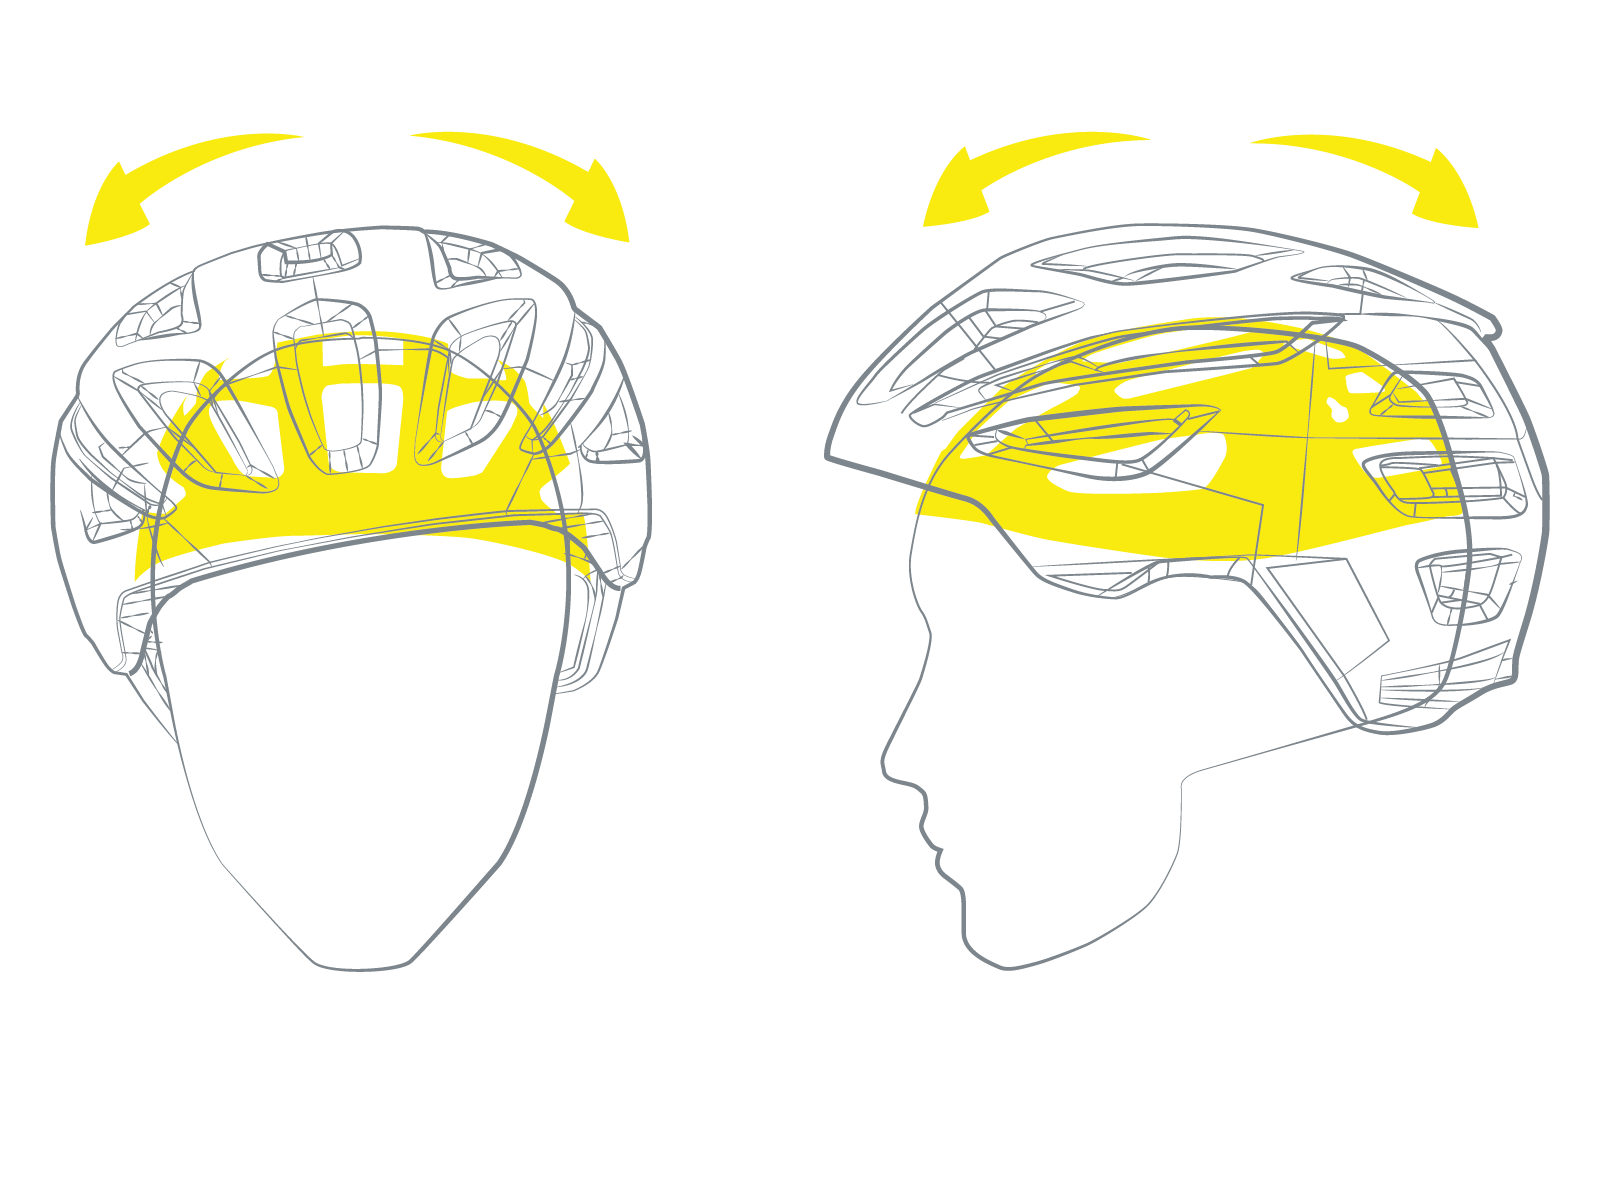 MIPS is the Safest According to Swedish Insurance Company Helmet Test